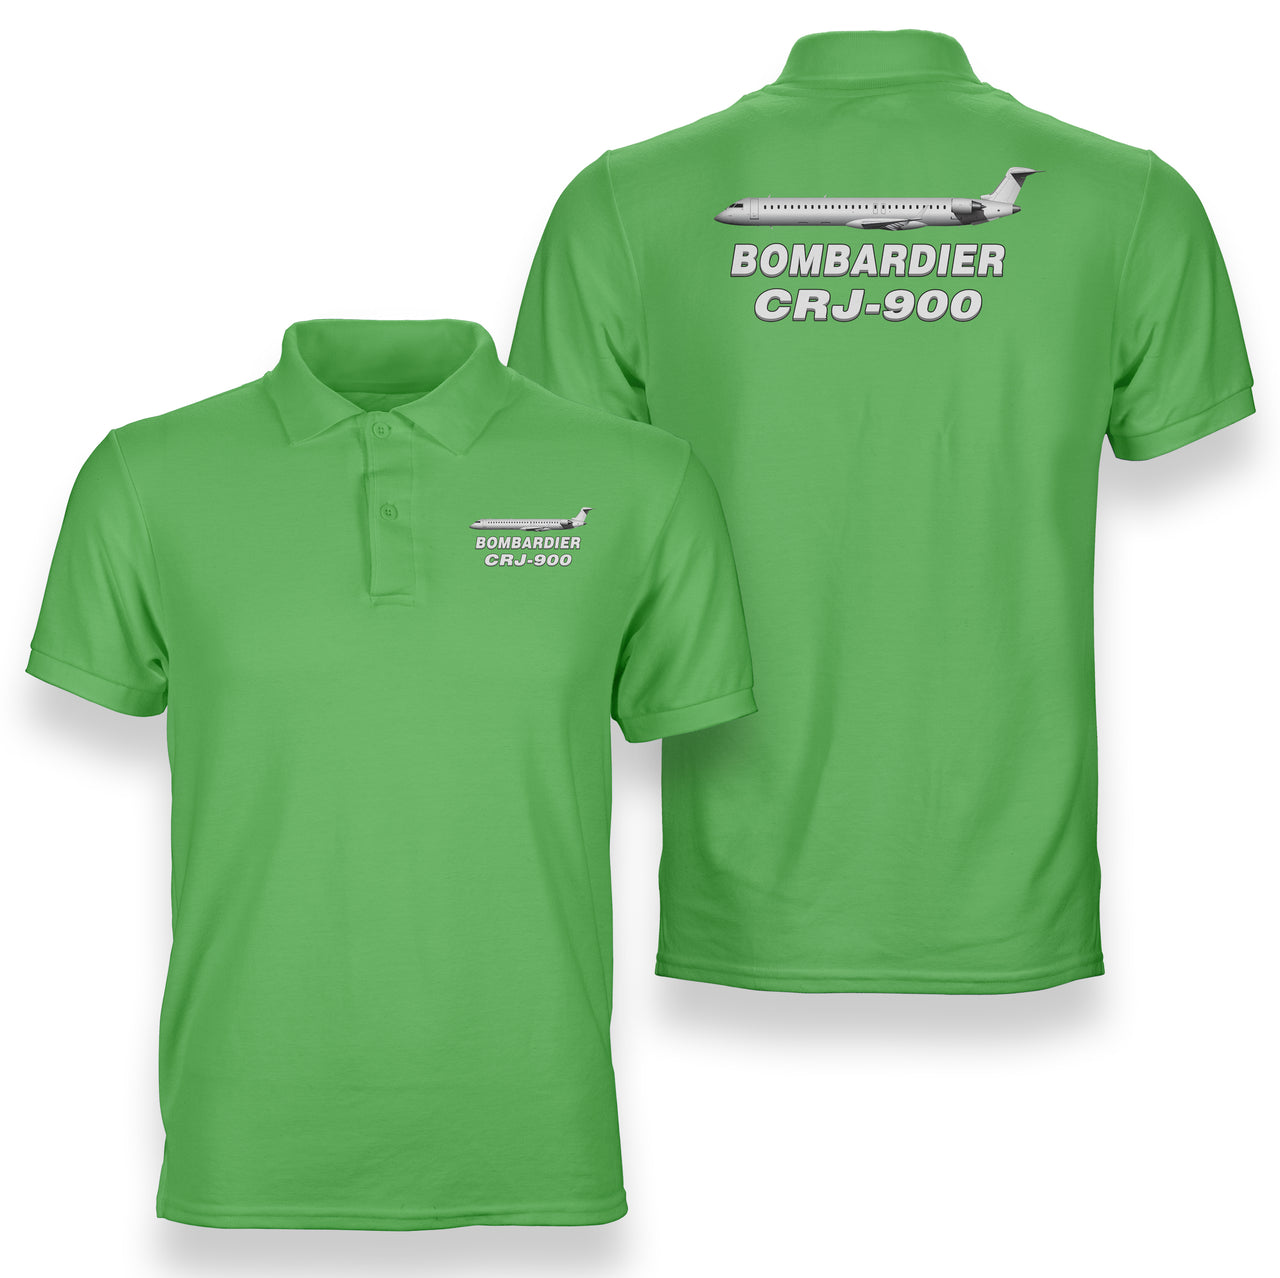 The Bombardier CRJ-900 Designed Double Side Polo T-Shirts